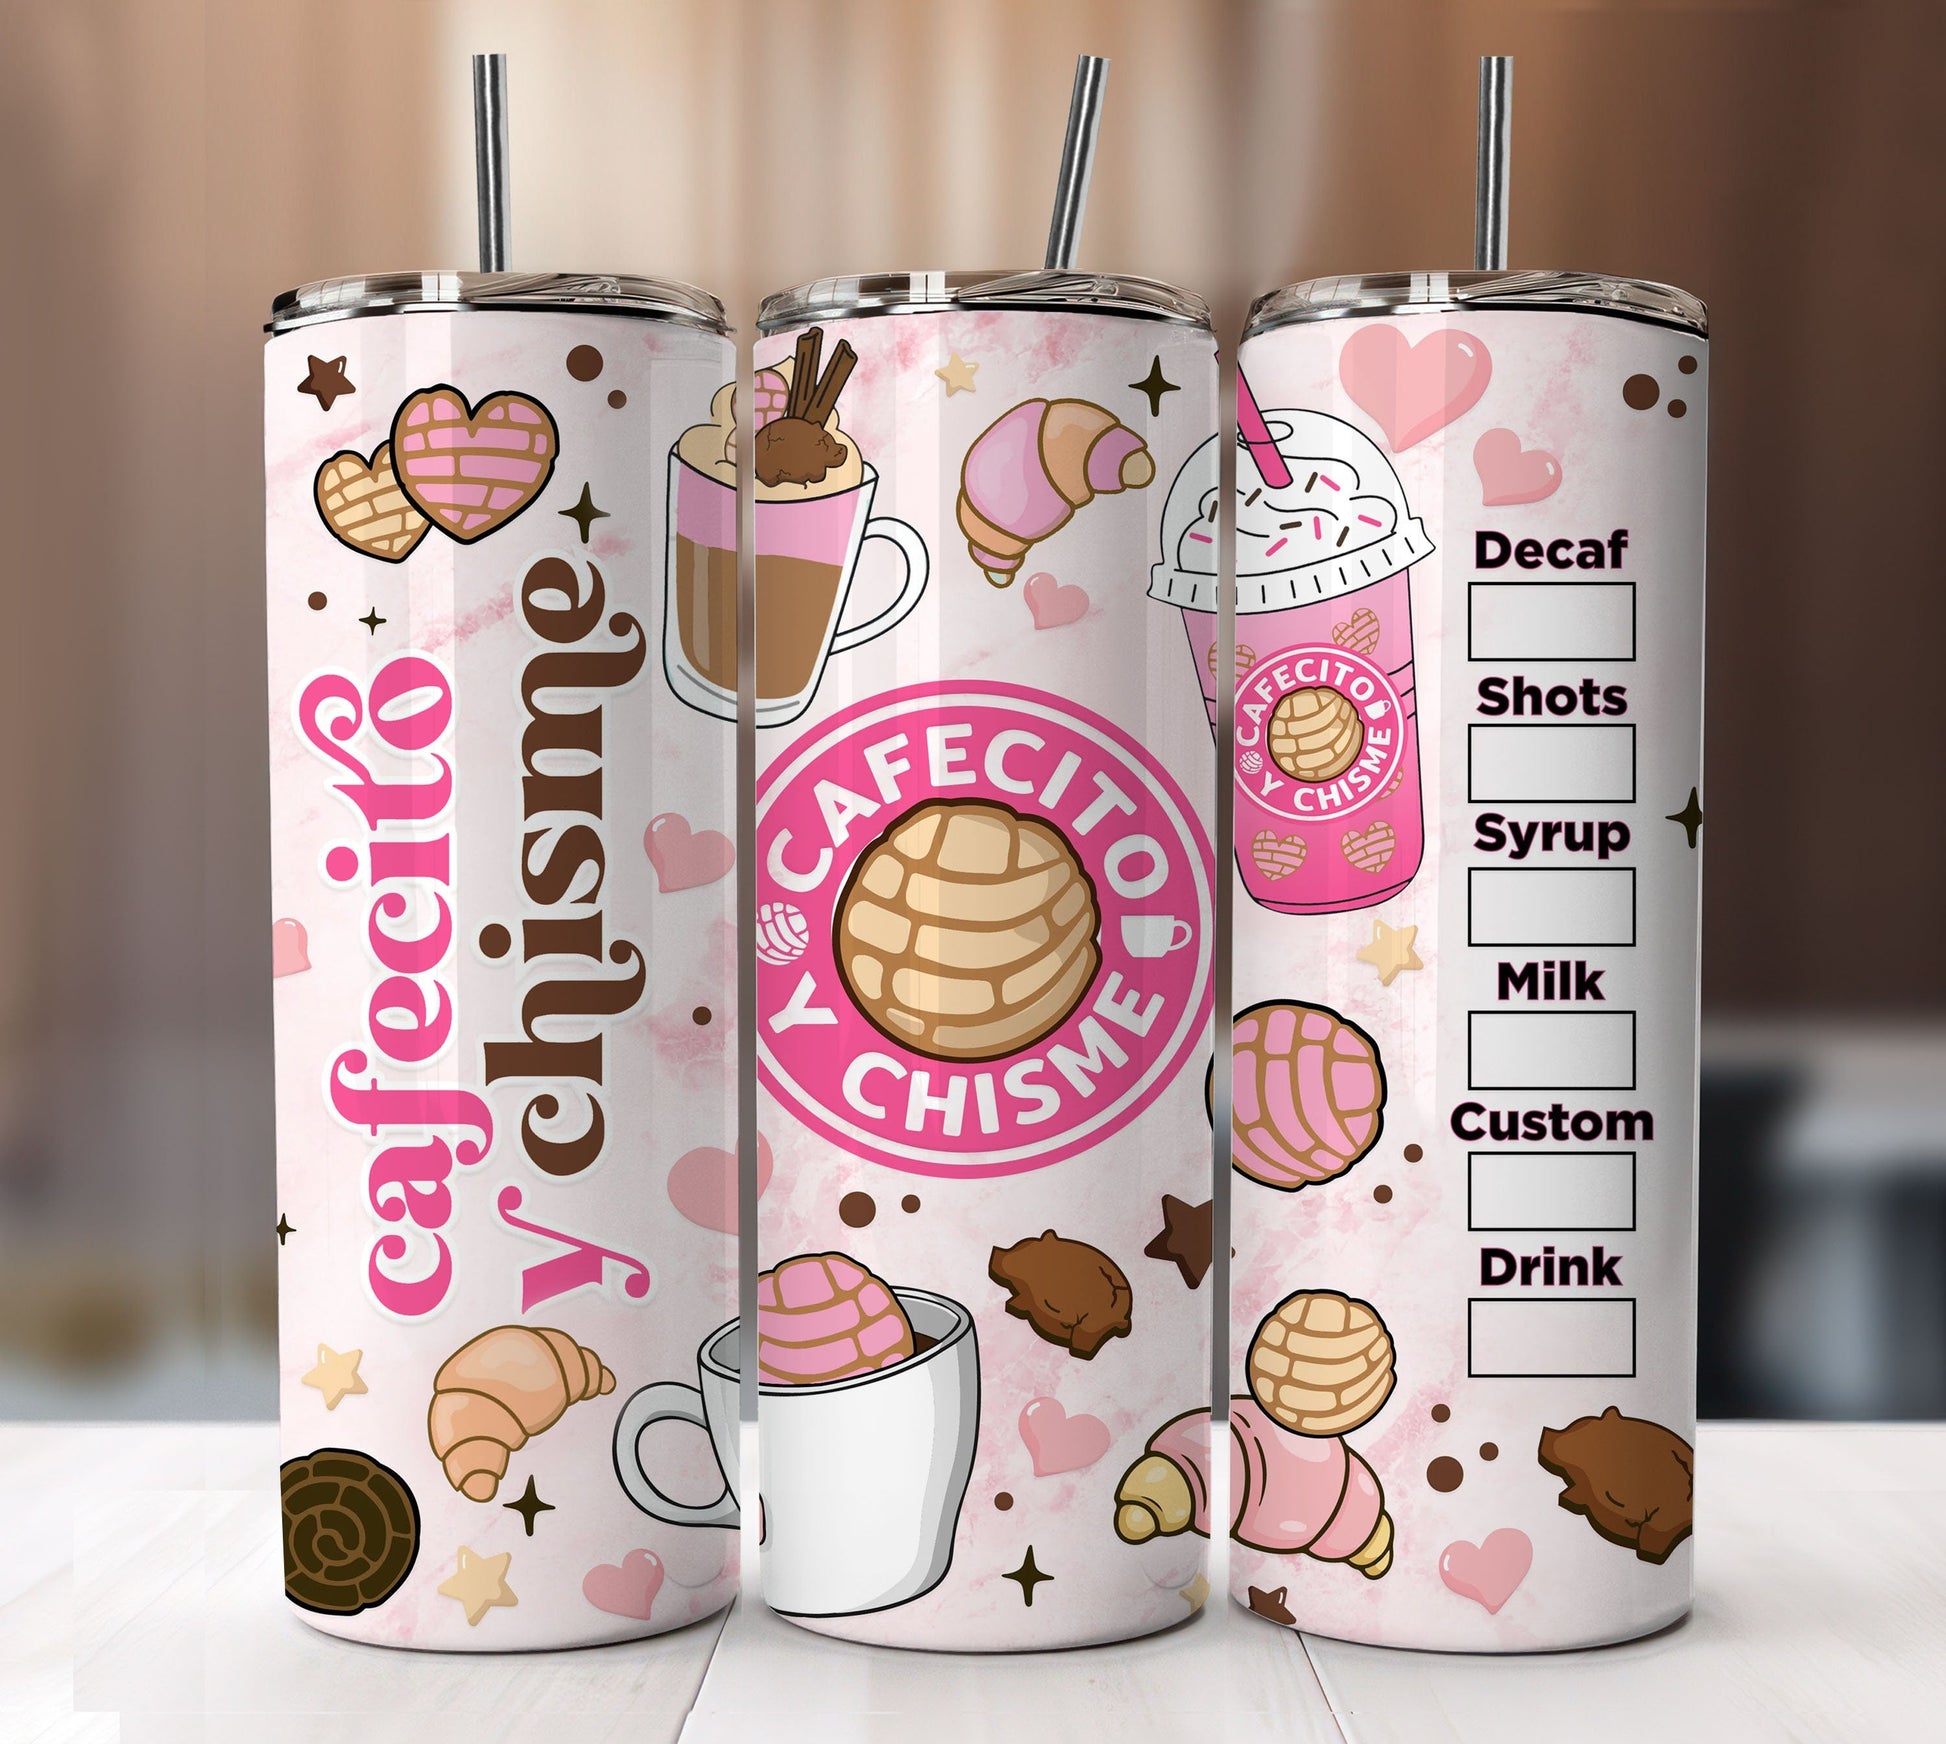 Cafecito y Chisme 20oz Skinny Coffee Tumbler, Mexico Pan Dulce 20oz Tumbler PNG, Spooky Conchas Tumbler Wrap, 20oz Skinny Tumbler Digital - VartDigitals